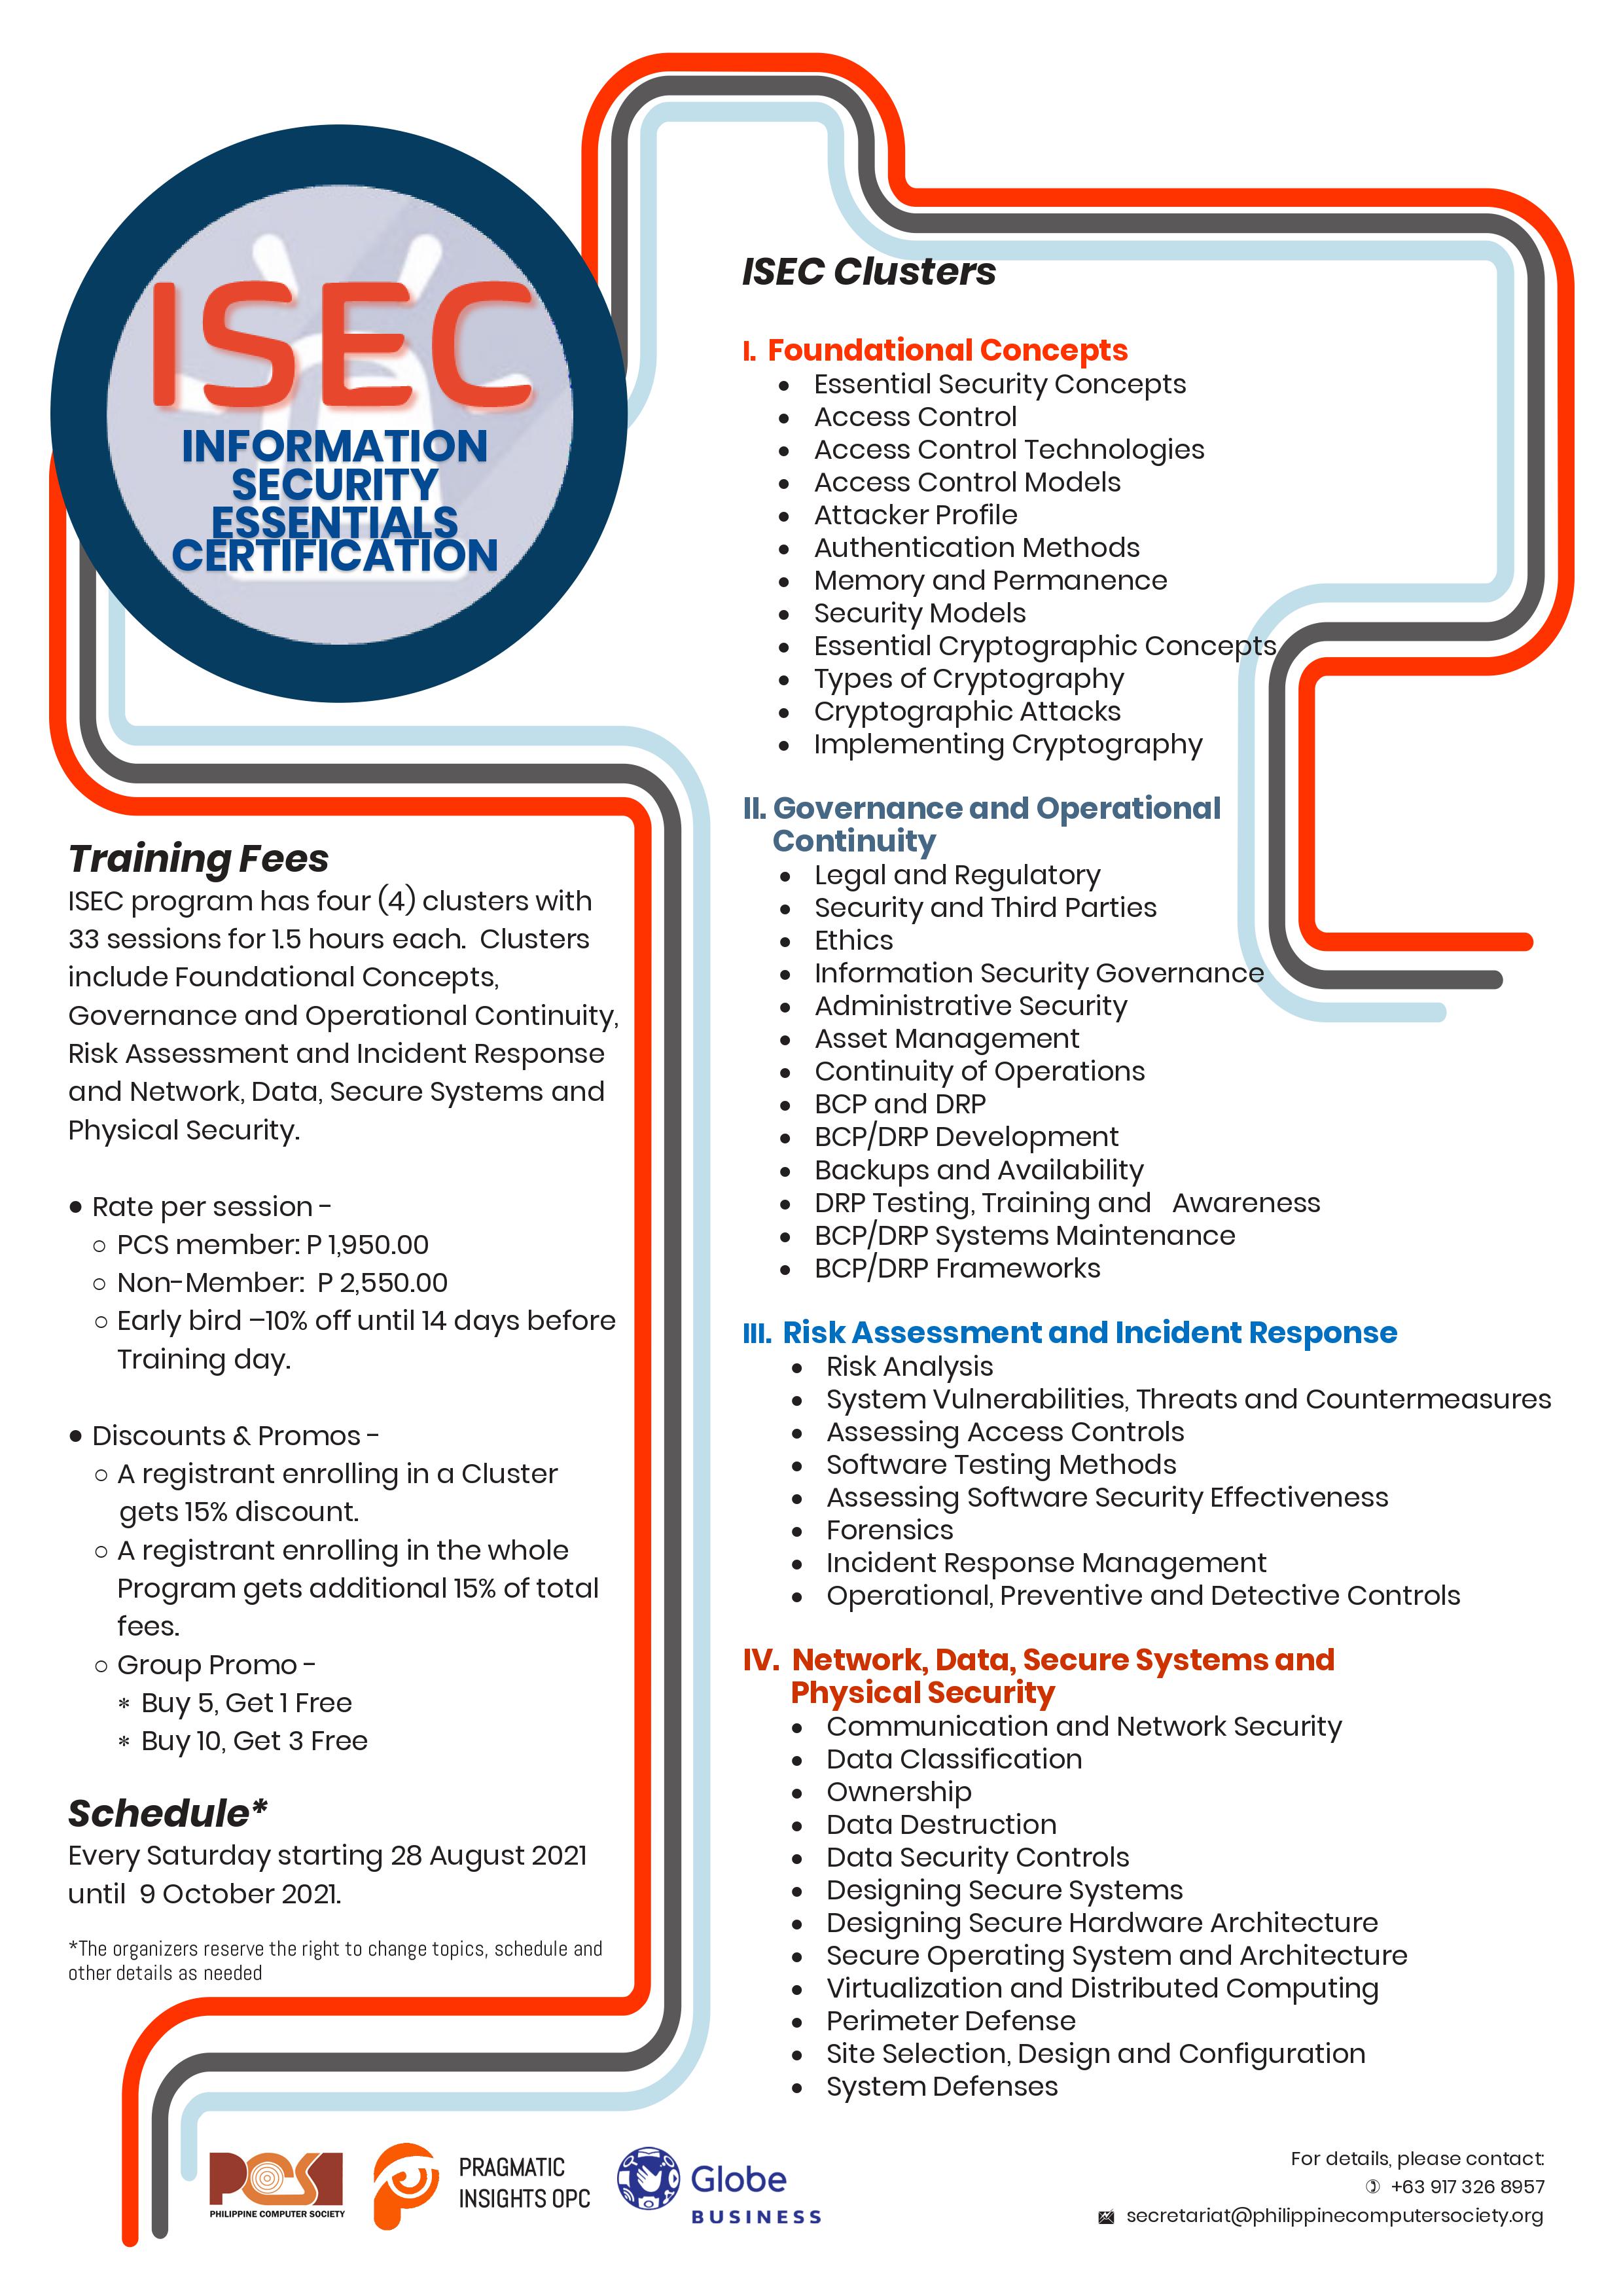 ISEC – Information Security Essentials Certification (Training Fees)